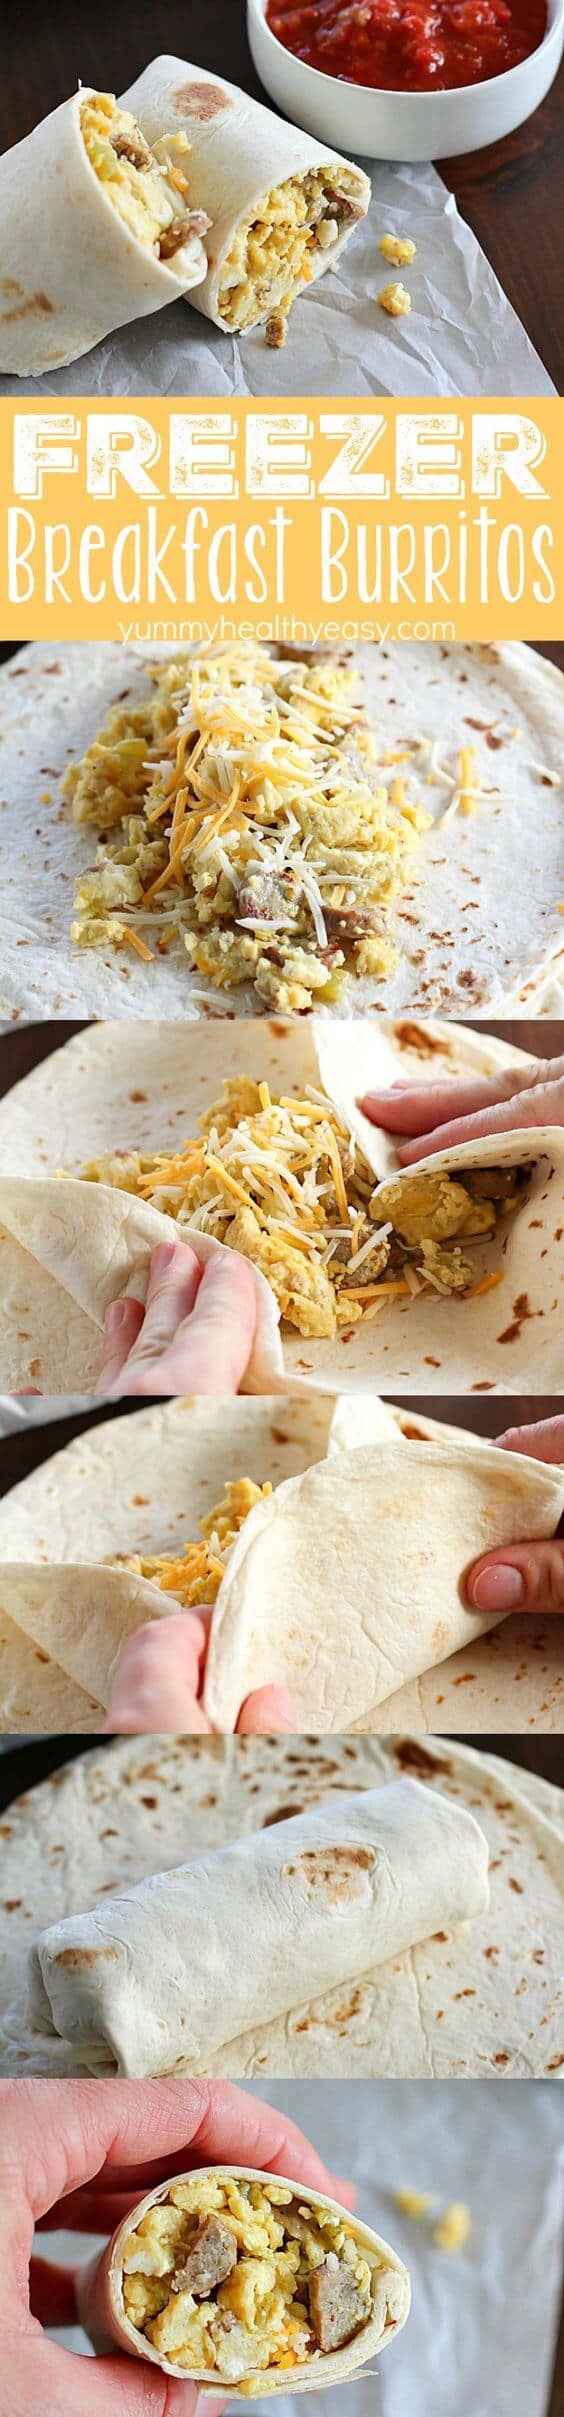 Freezer Breakfast Burritos Recipe from Yummy Healthy Easy #freezermeals #makeaheadmeals "Fix up a batch (so easy) and throw in the freezer. When you’re rushed in the morning, throw a freezer breakfast burrito in the microwave and you’re out the door with a healthy breakfast in minutes!"   